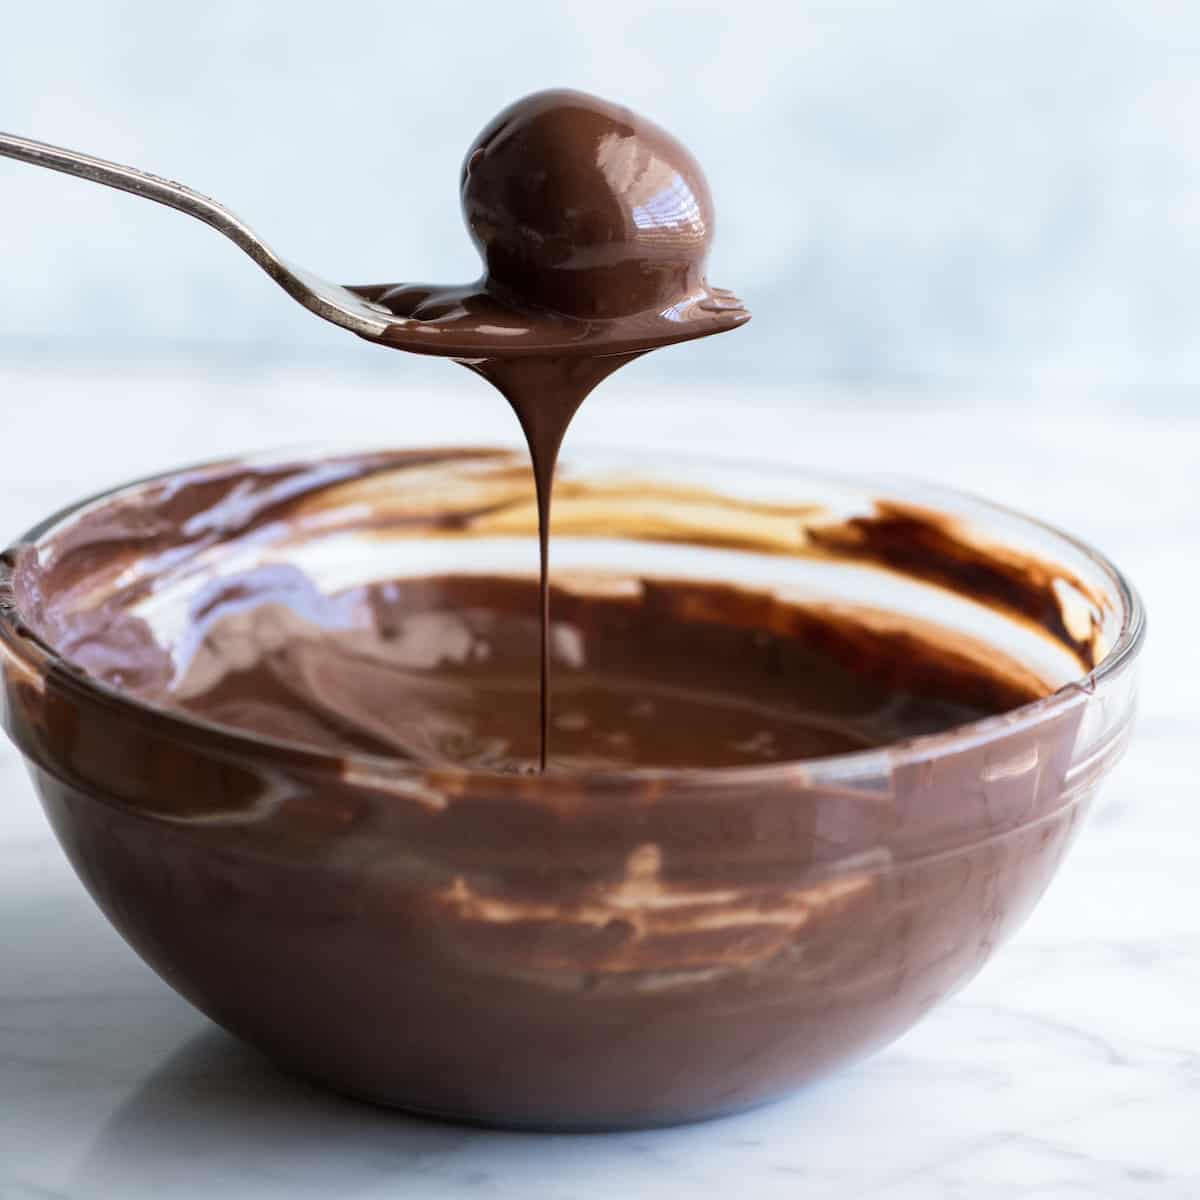 front view of a peanut butter ball being dipped in chocolate